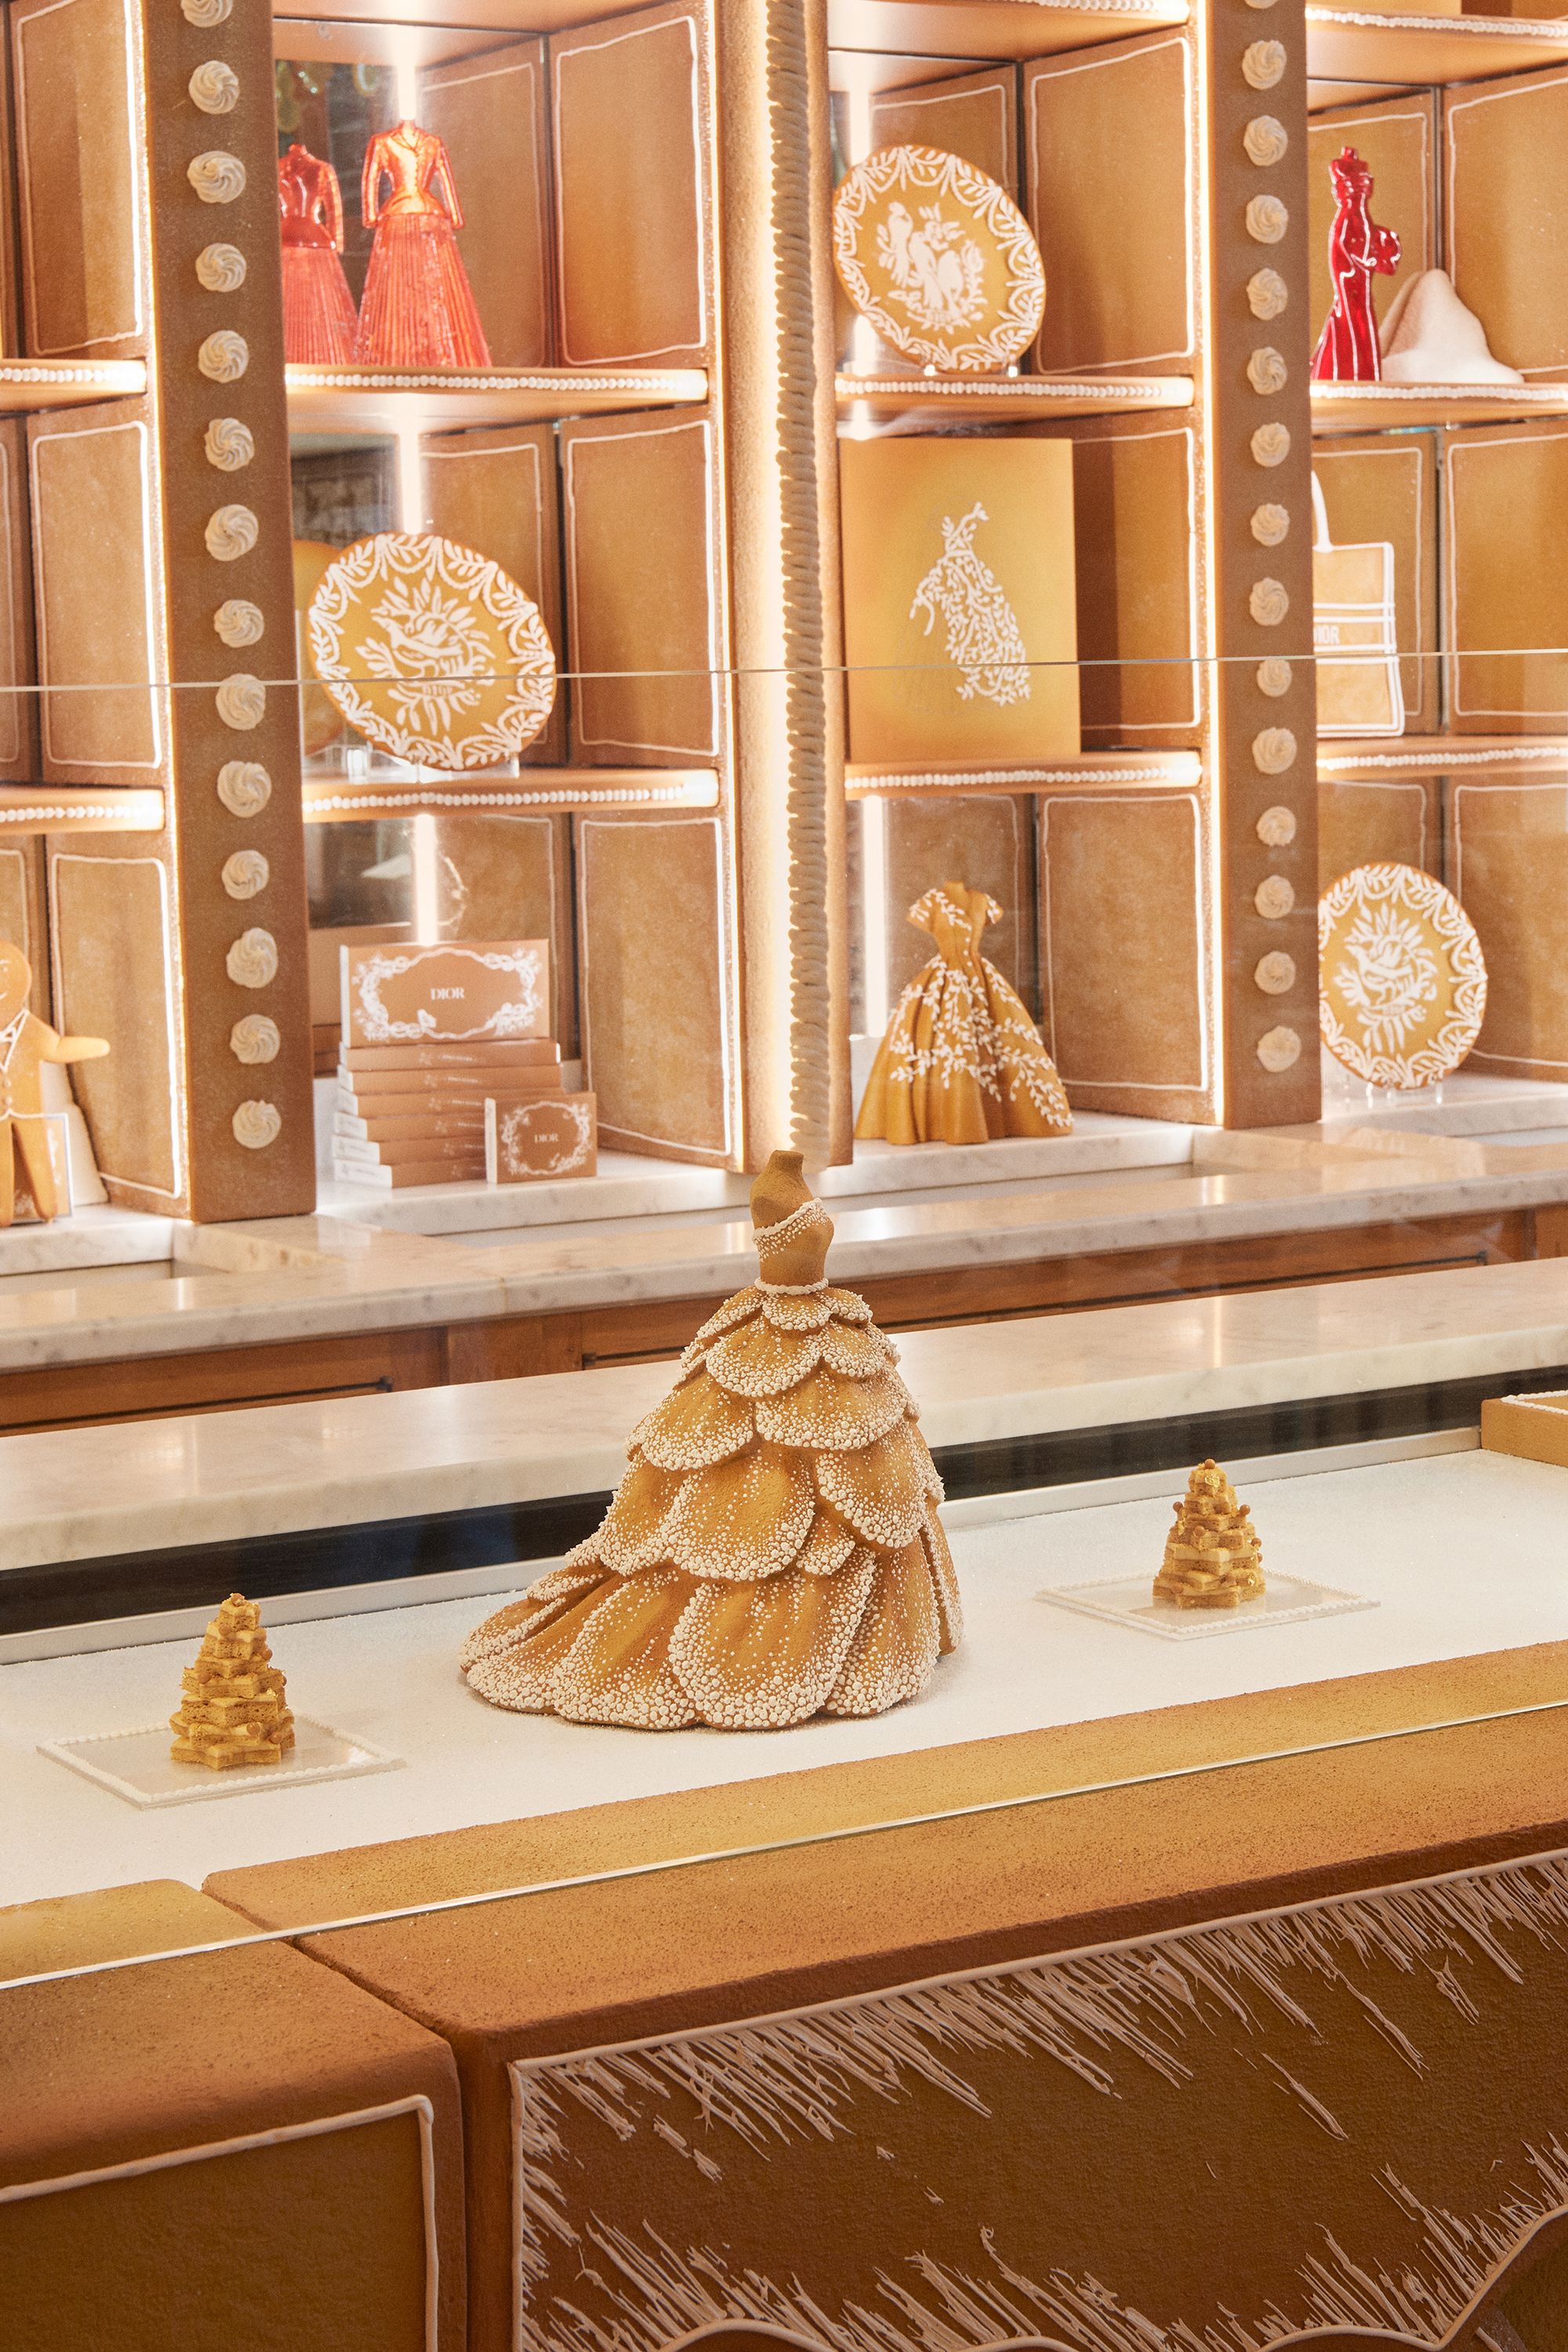 Dior takes over Harrods with a festive wonderland and fashion exhibition